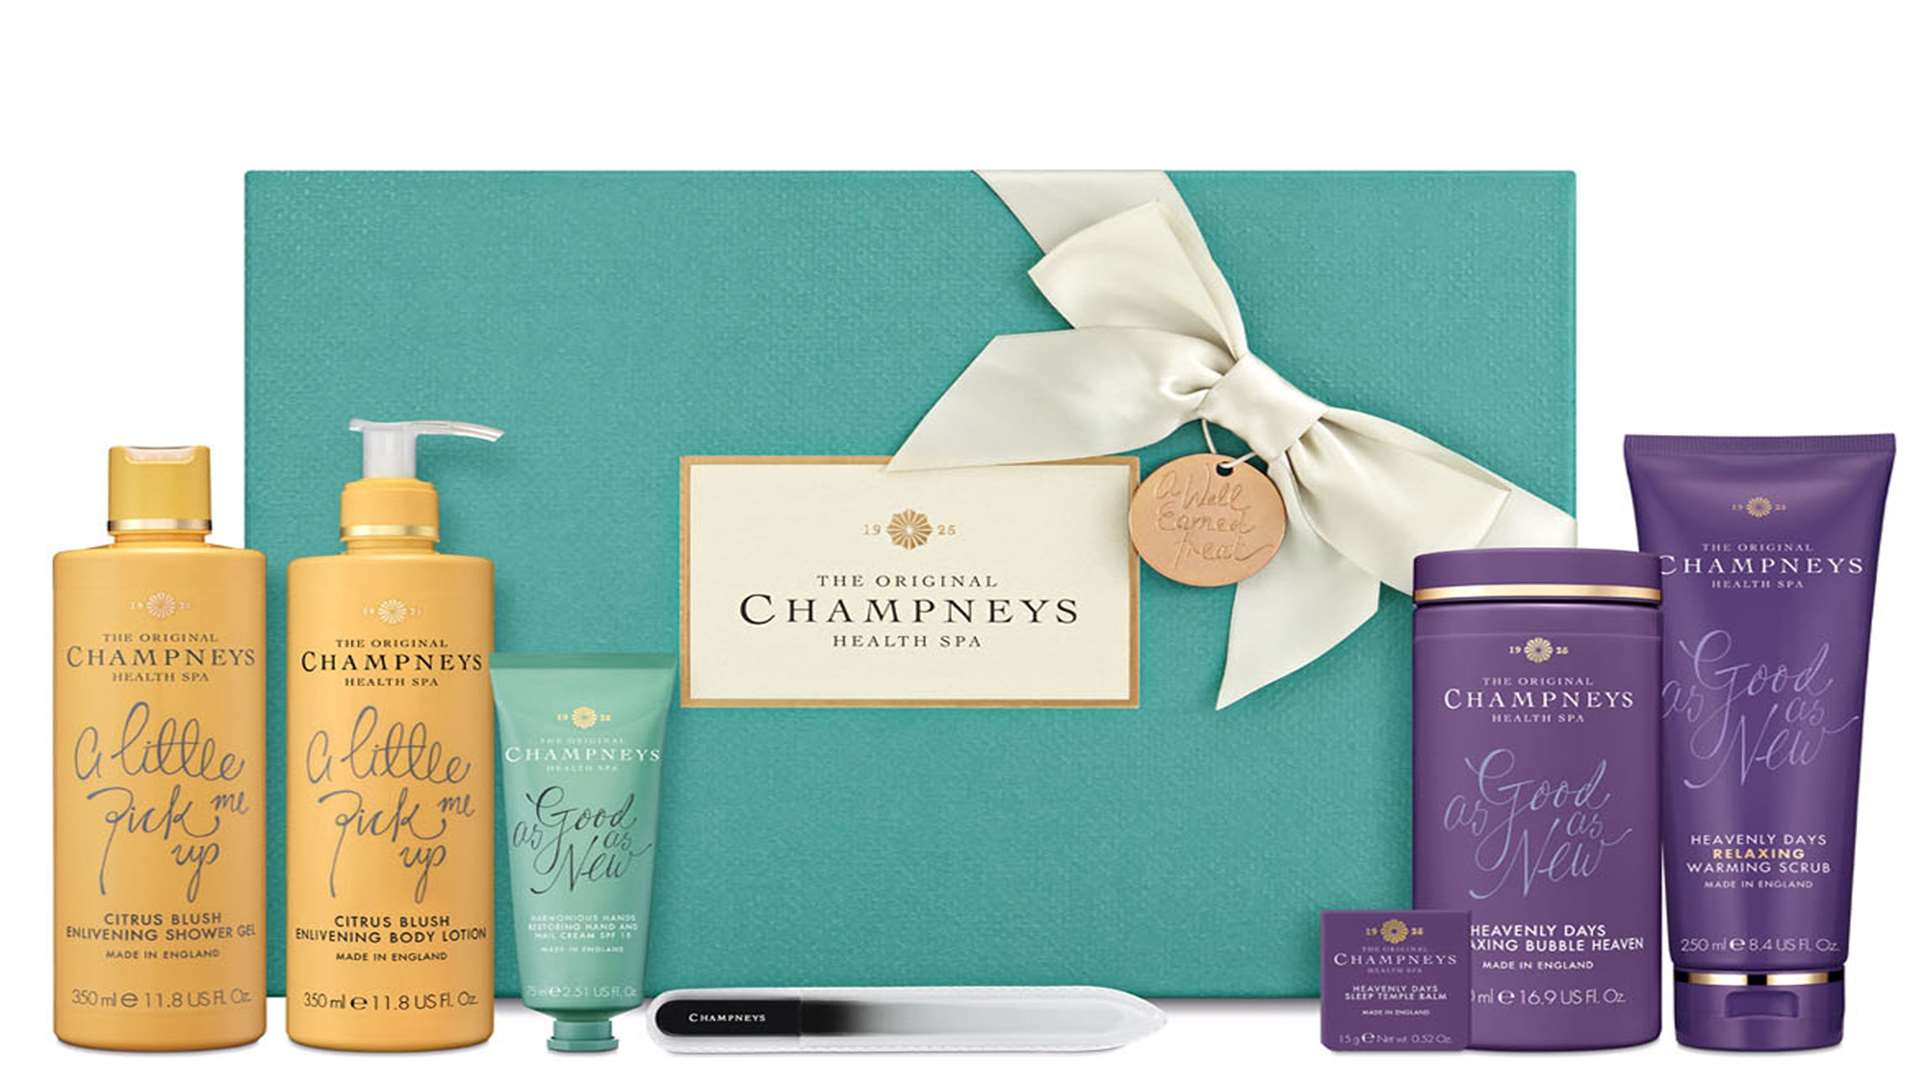 Champneys gift box from Boots